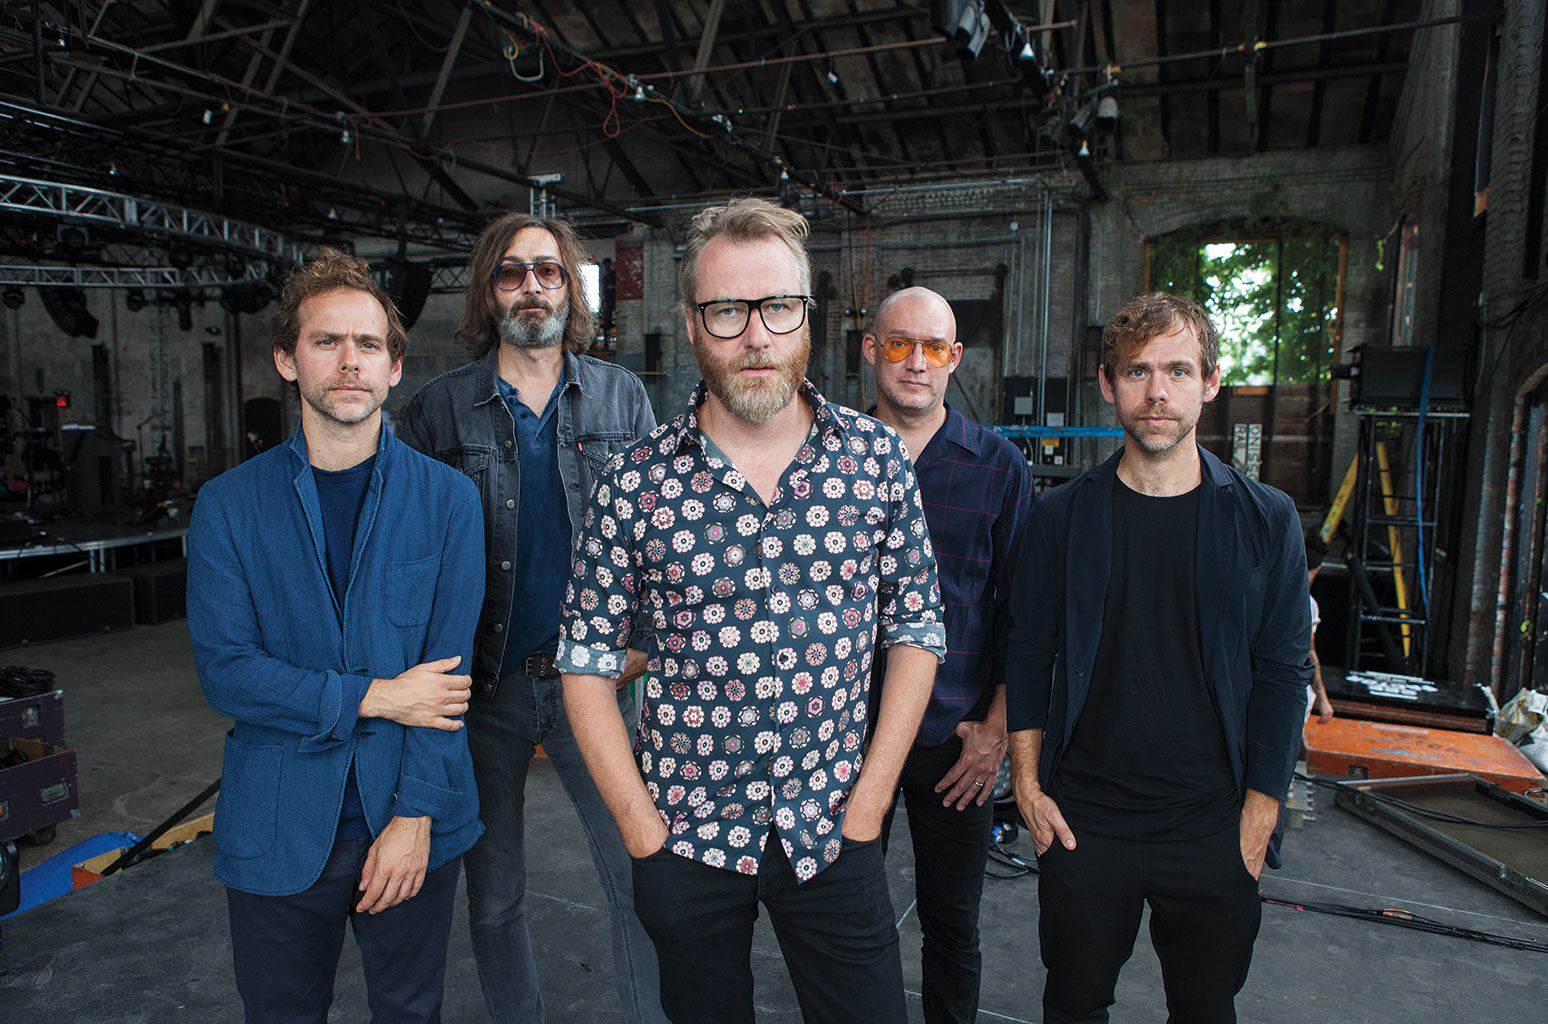 the national tour band